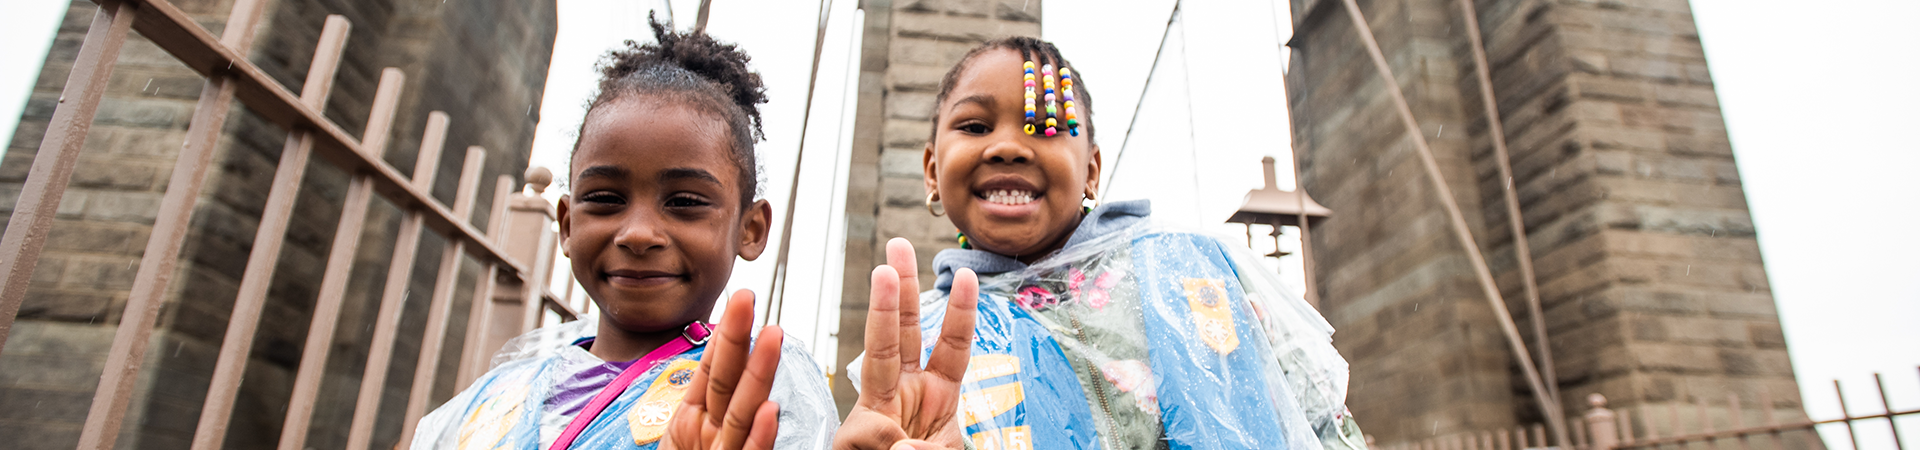  two daisy girl scouts on the brooklyn bridge, smiling holding up the girl scout sign with their hands 